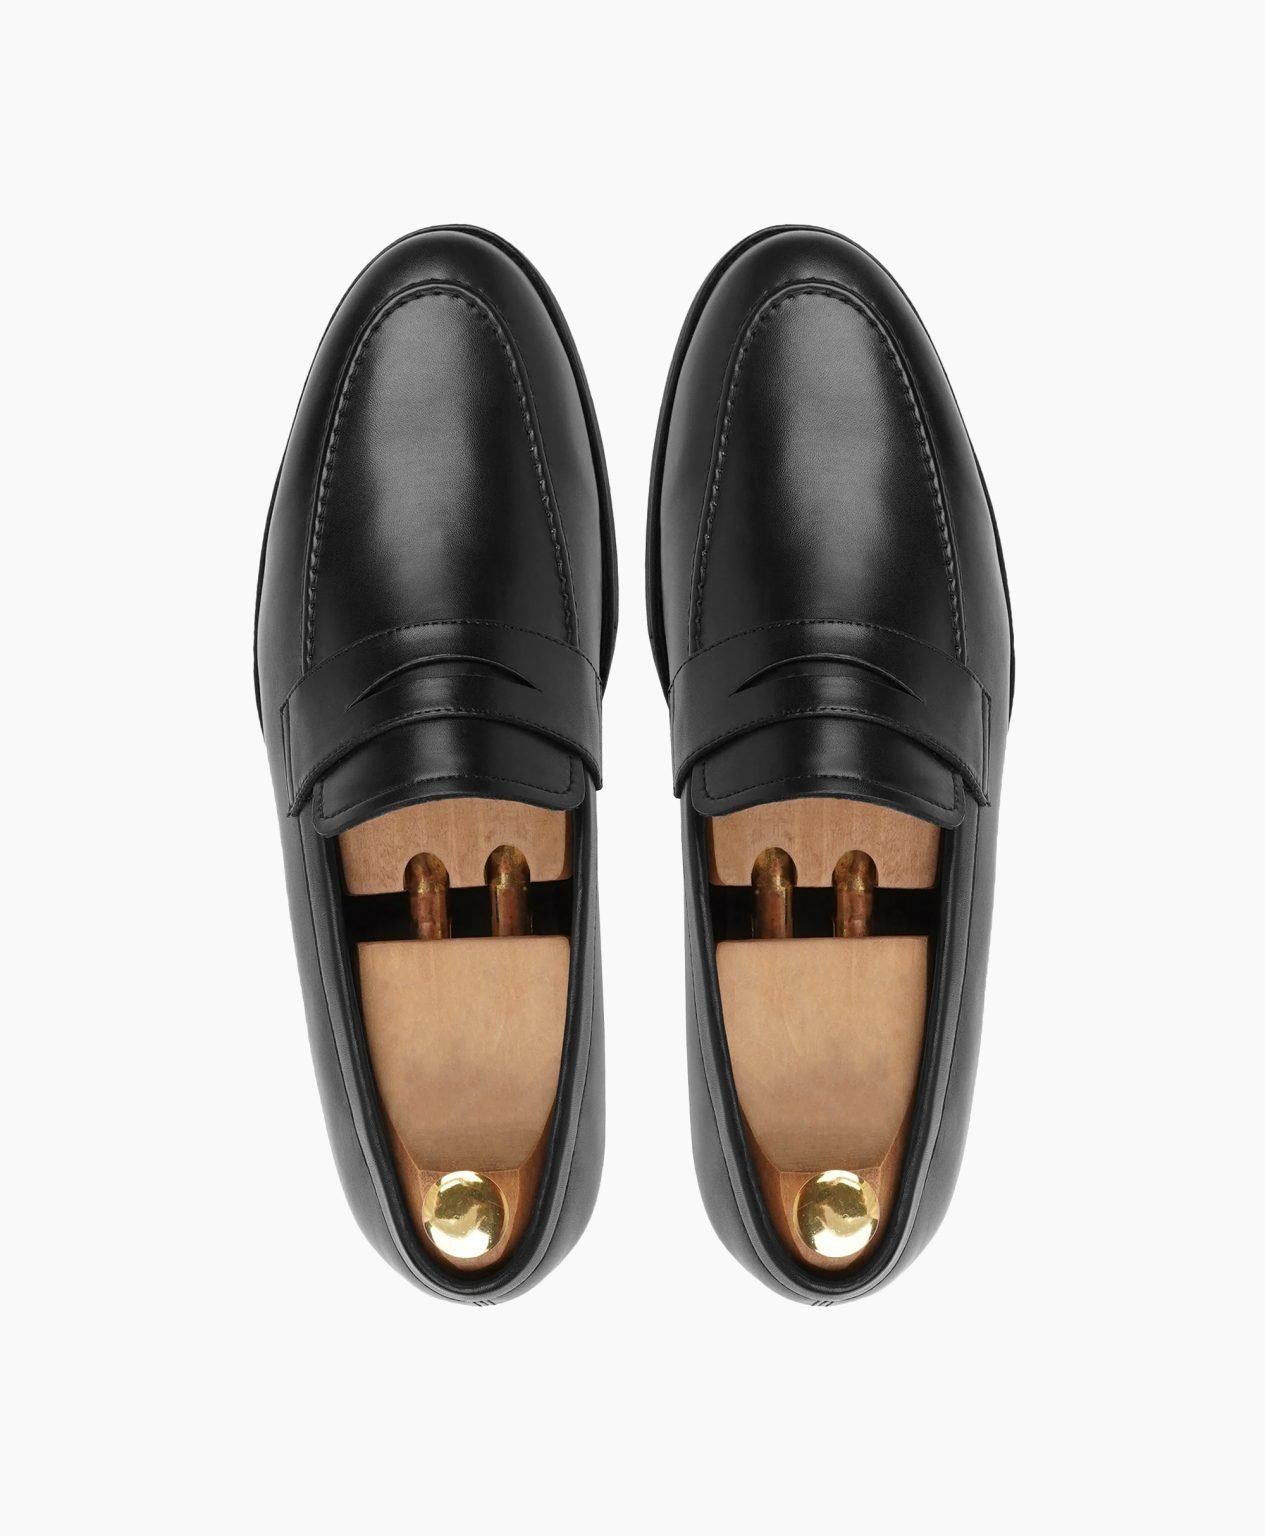 crediton-black-leather-loafers-image202